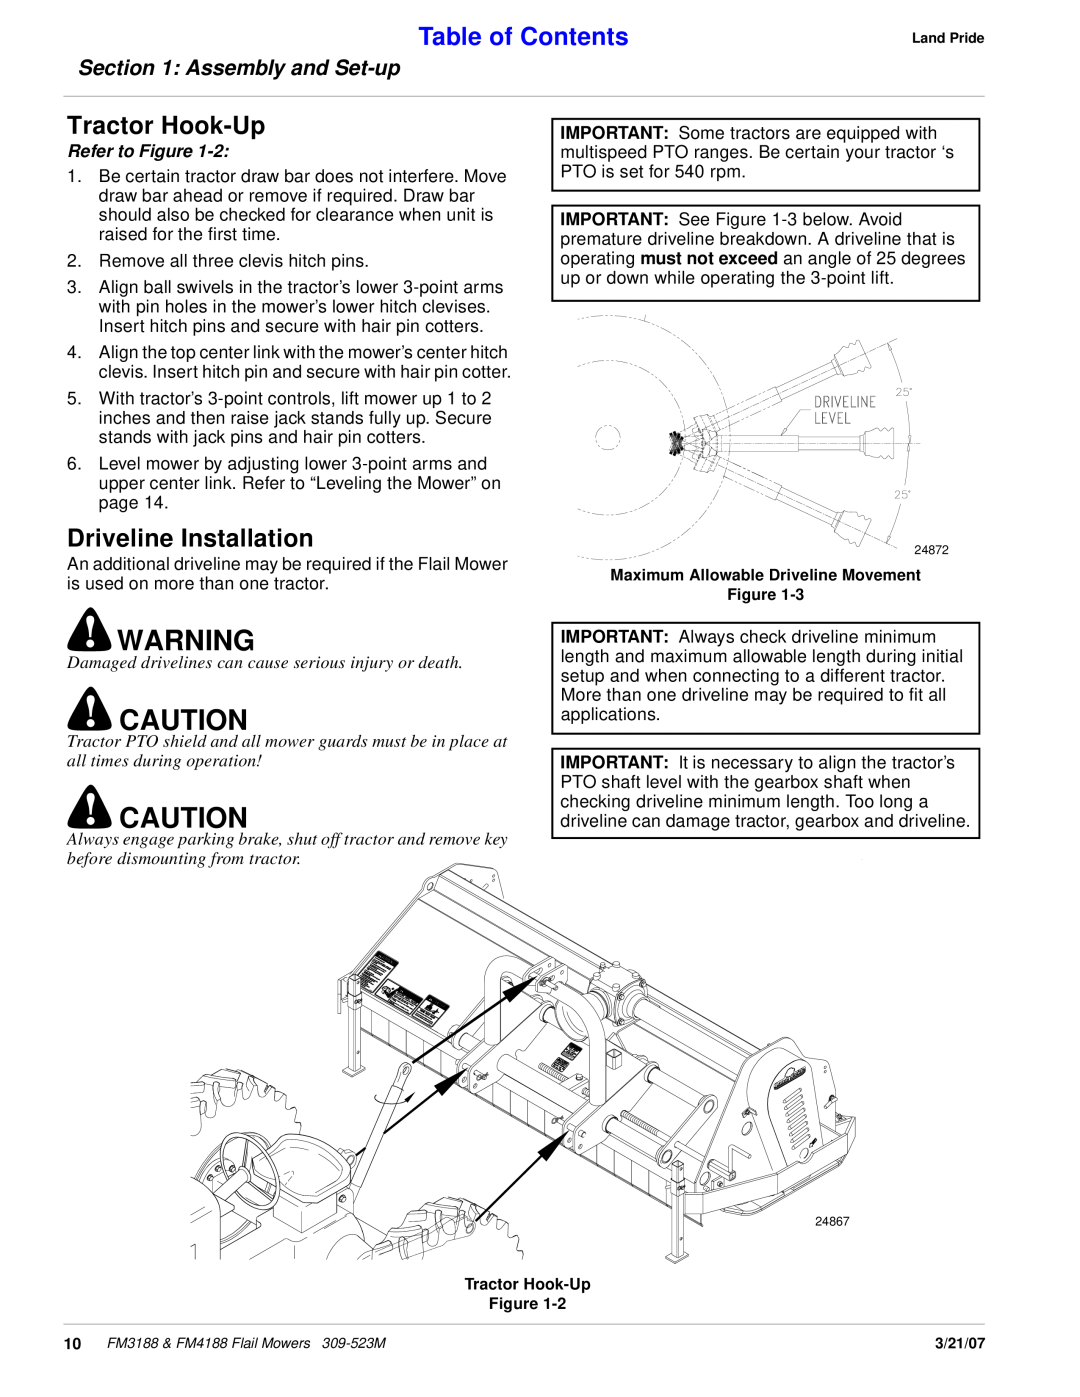 Land Pride FM4188, FM3188 Tractor Hook-Up, Driveline Installation, Table of Contents, Assembly and Set-up, Refer to Figure 